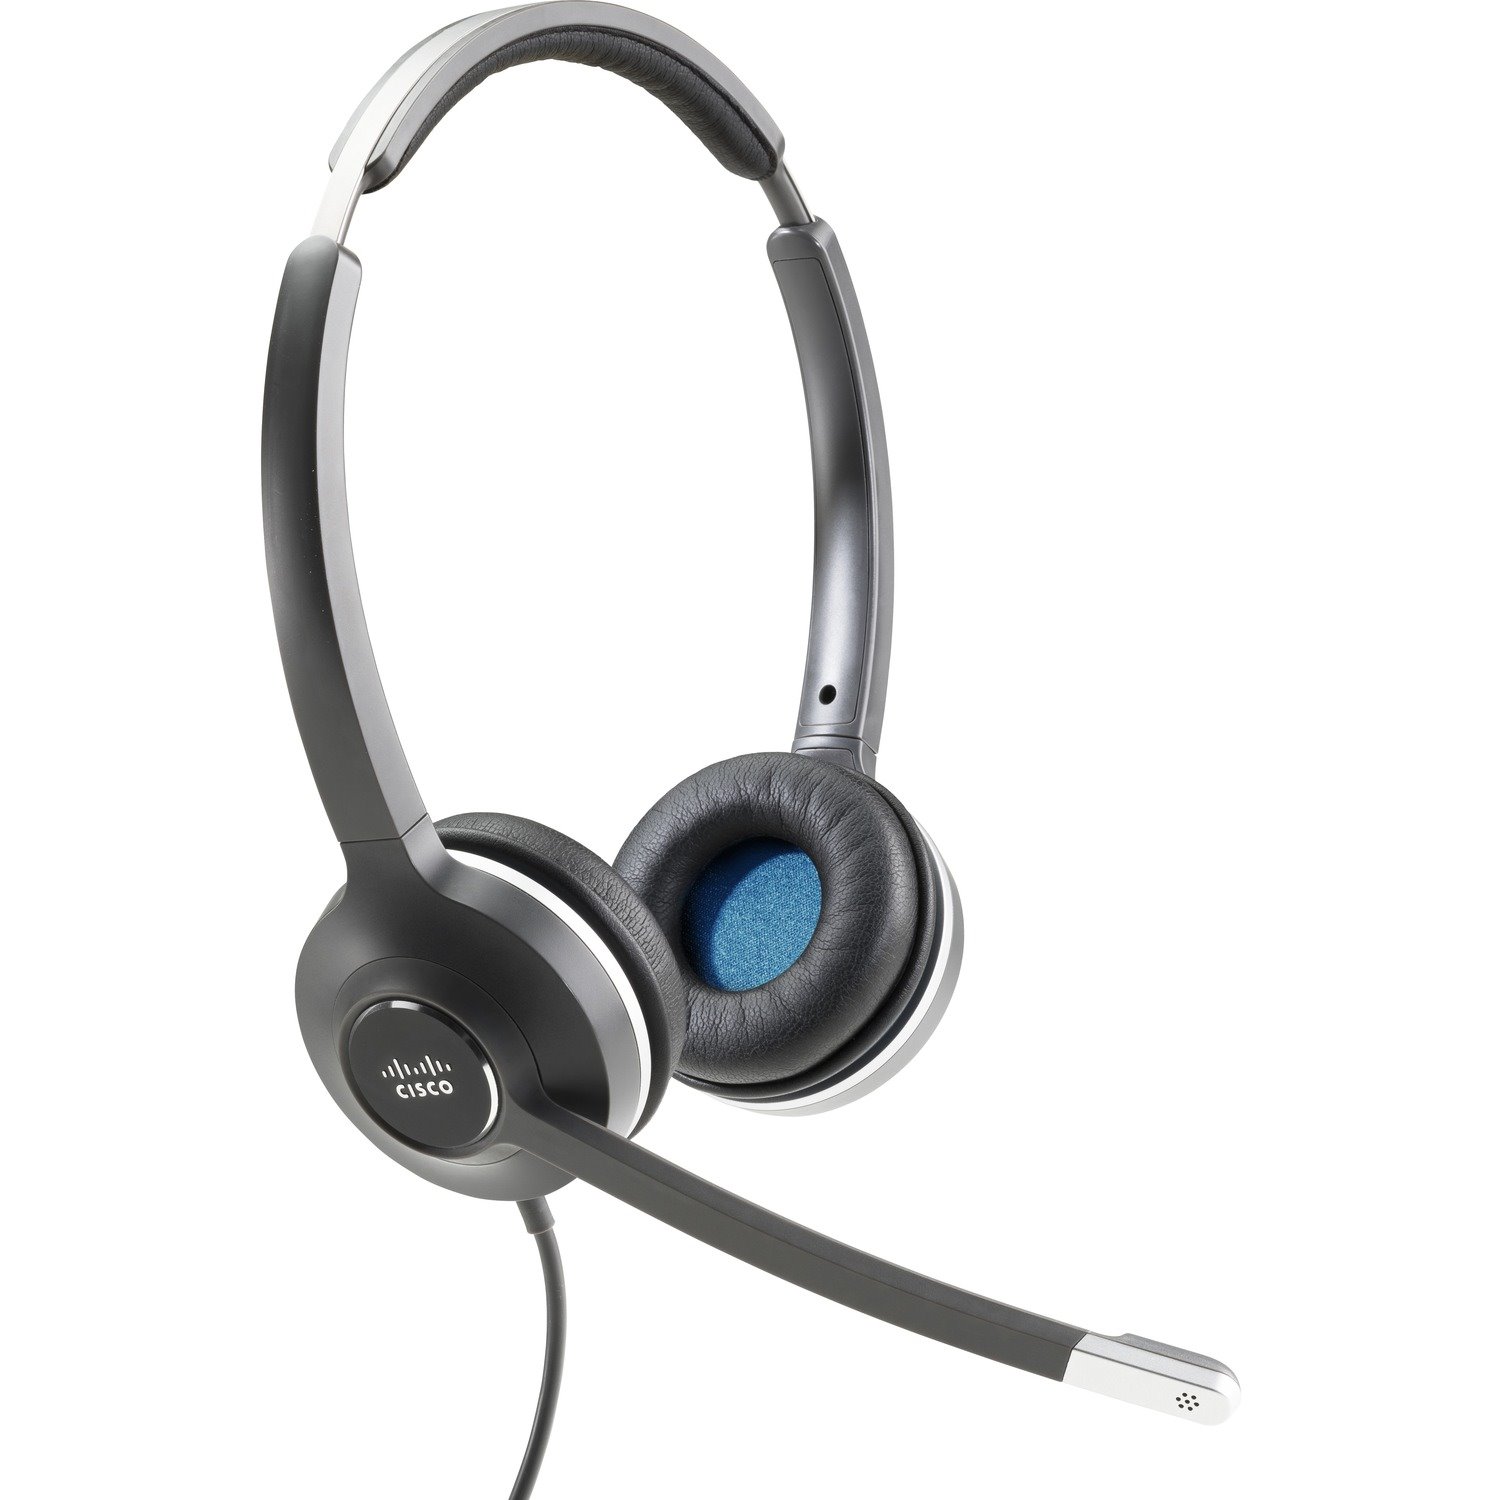 Cisco 532 Wired Over-the-head Stereo Headset